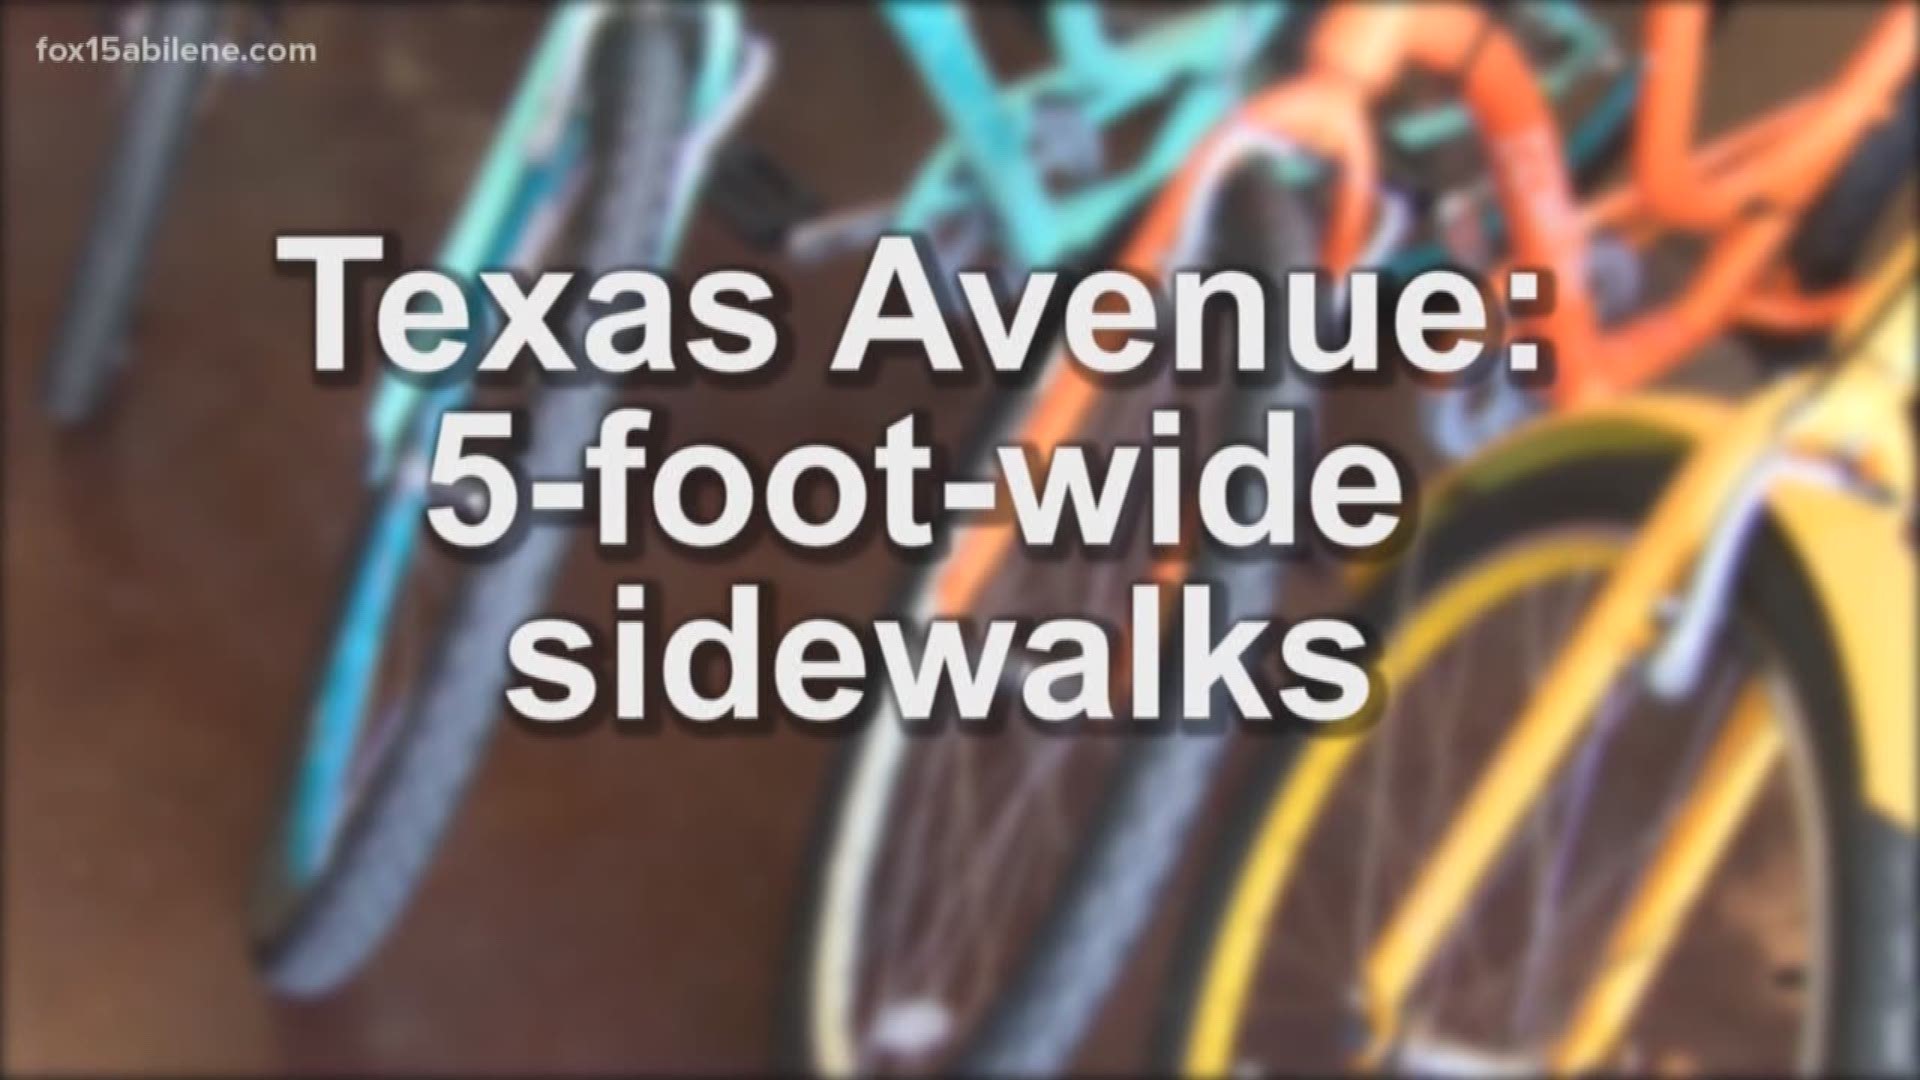 TxDot will fund pedestrian and bike projects across the state.